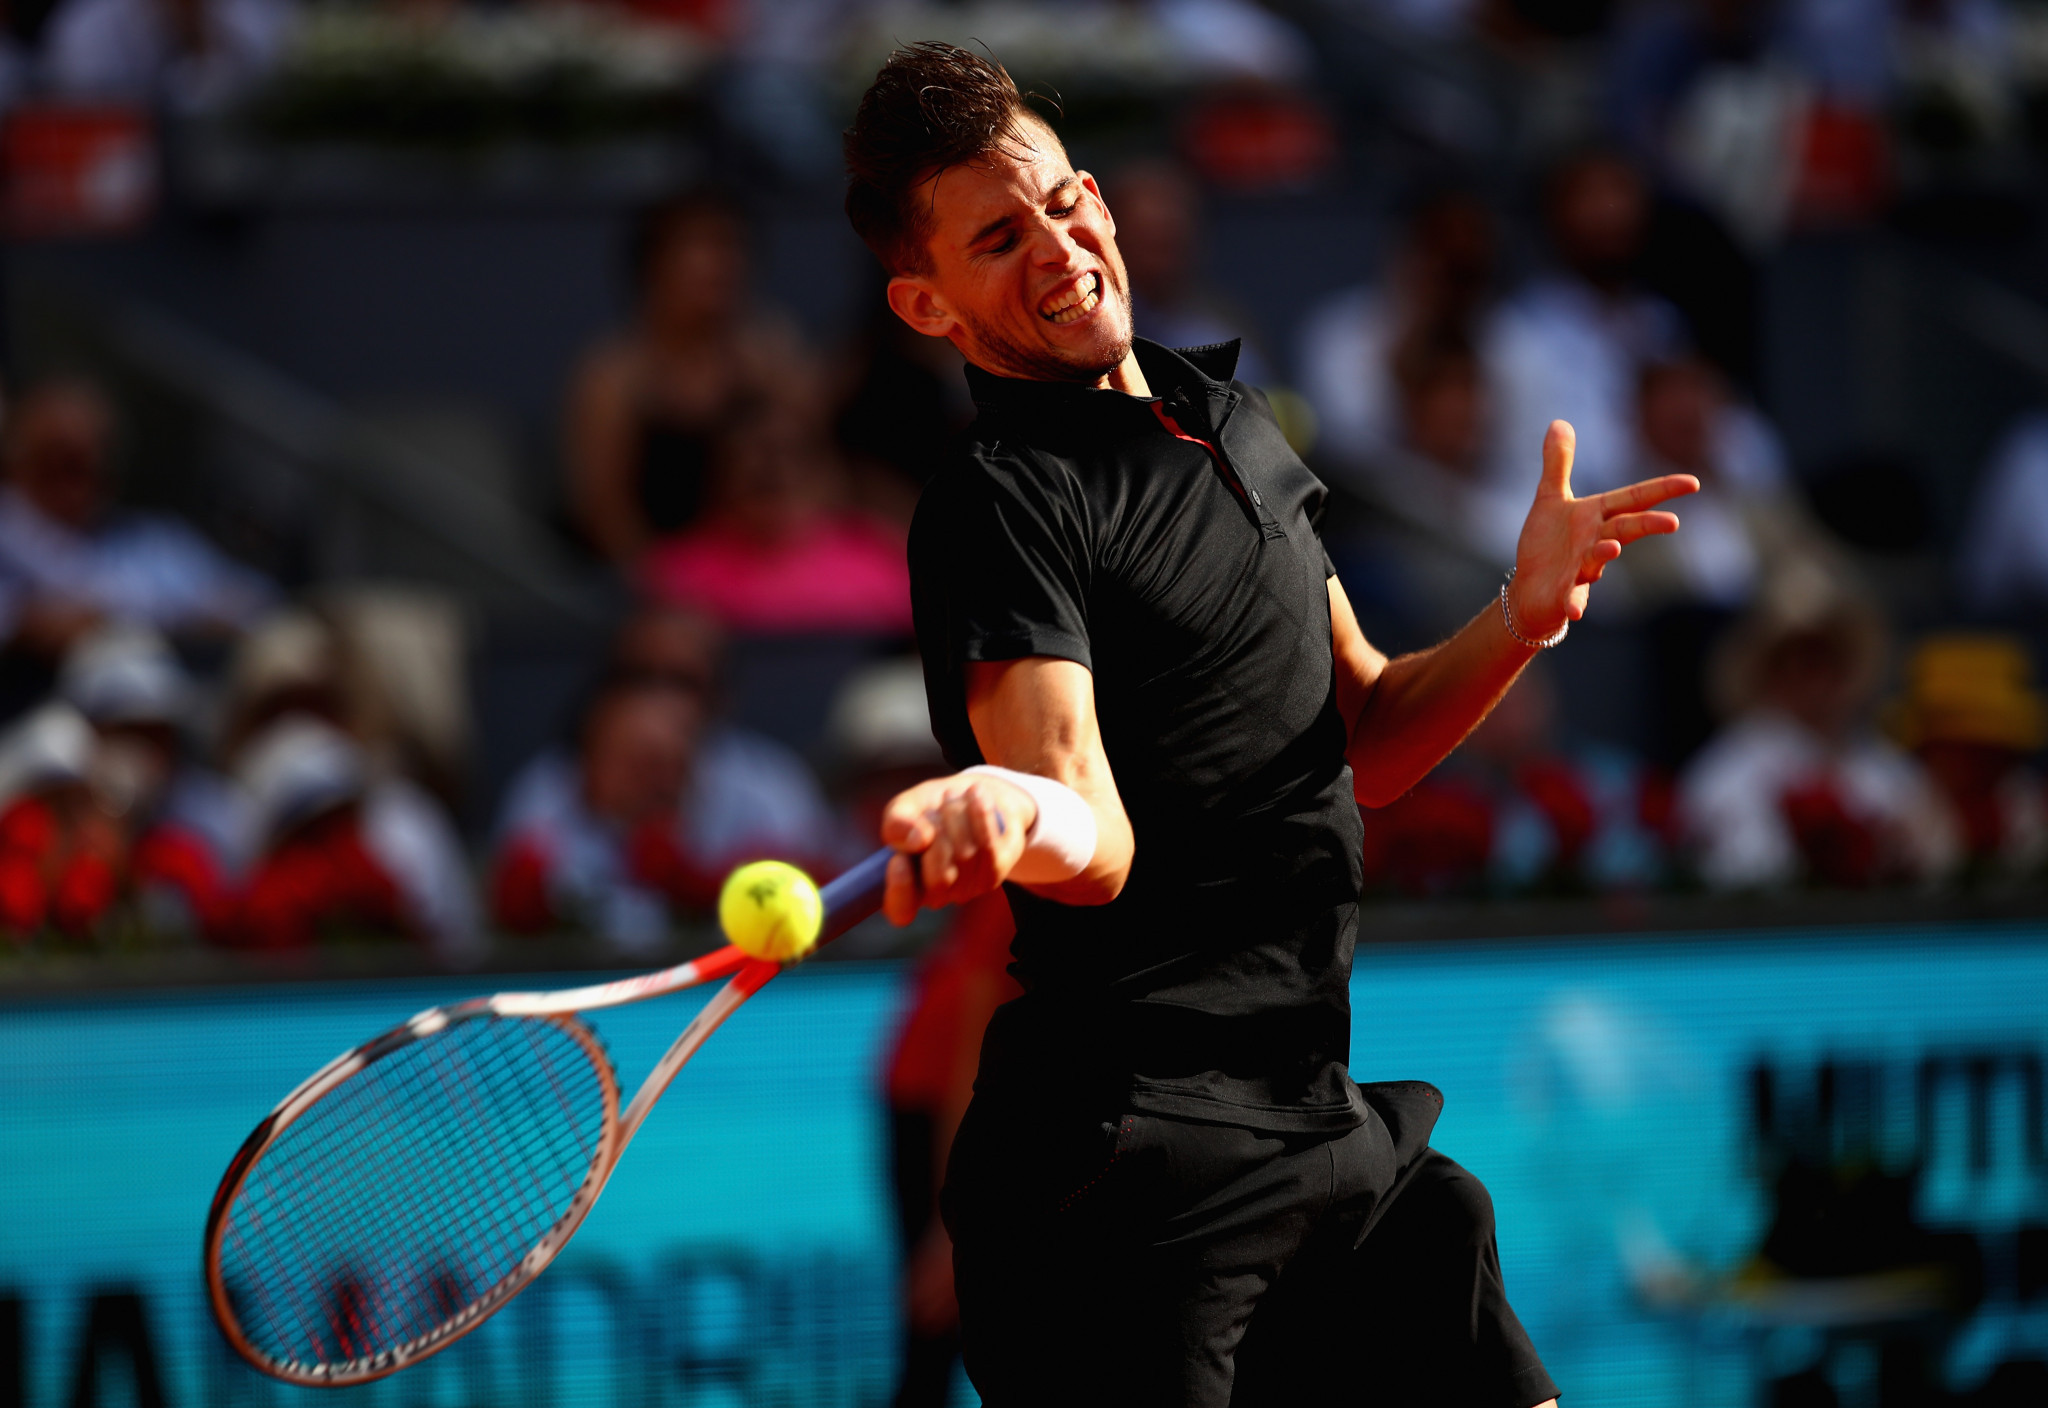 Thiem ends Nadal's unbeaten run on clay with victory at Mutua Madrid Open